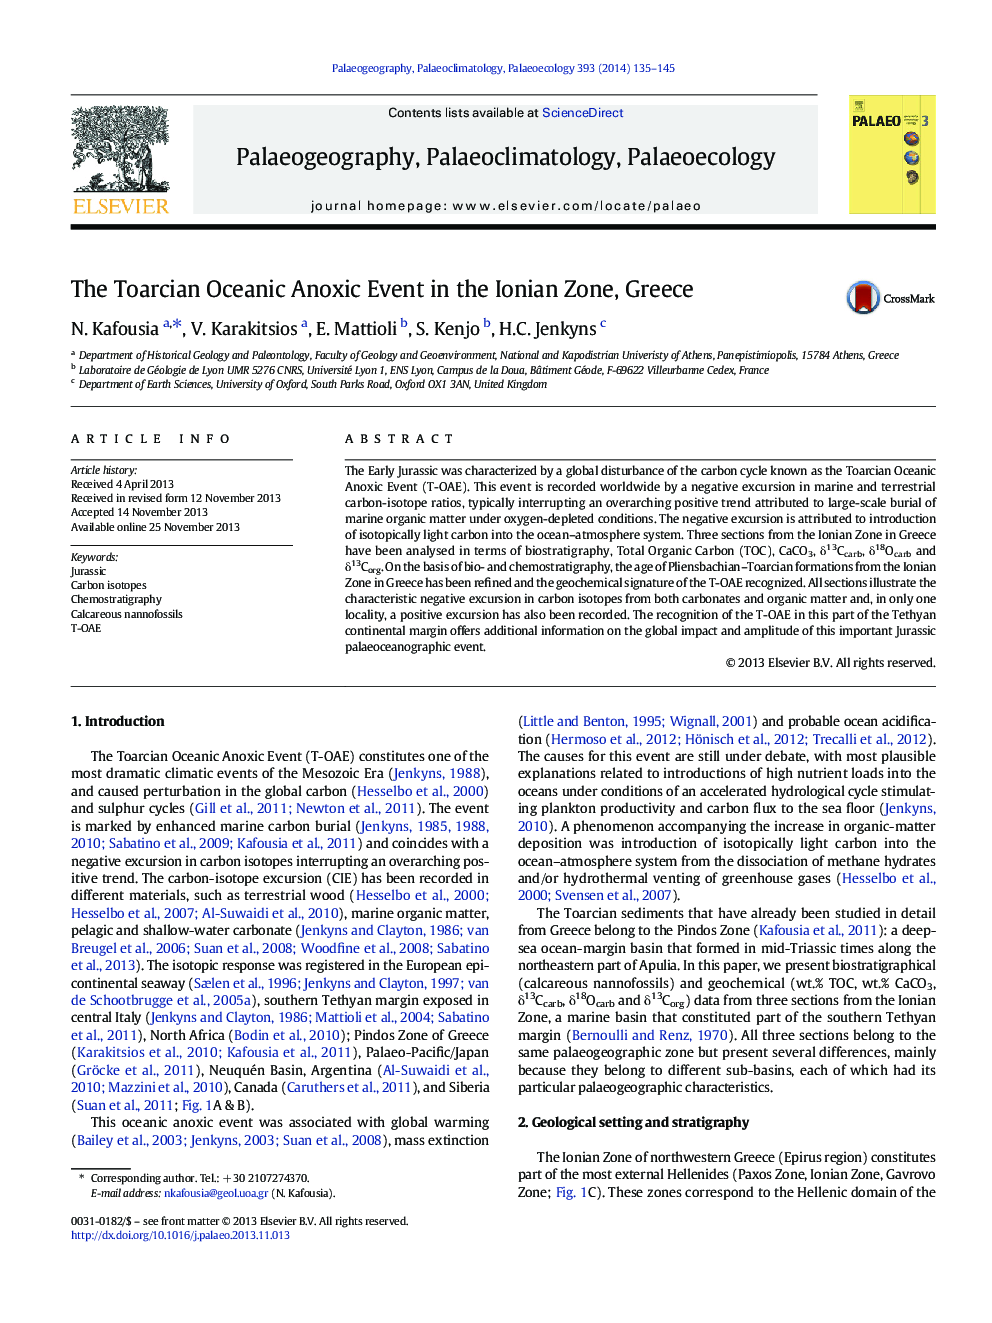 The Toarcian Oceanic Anoxic Event in the Ionian Zone, Greece